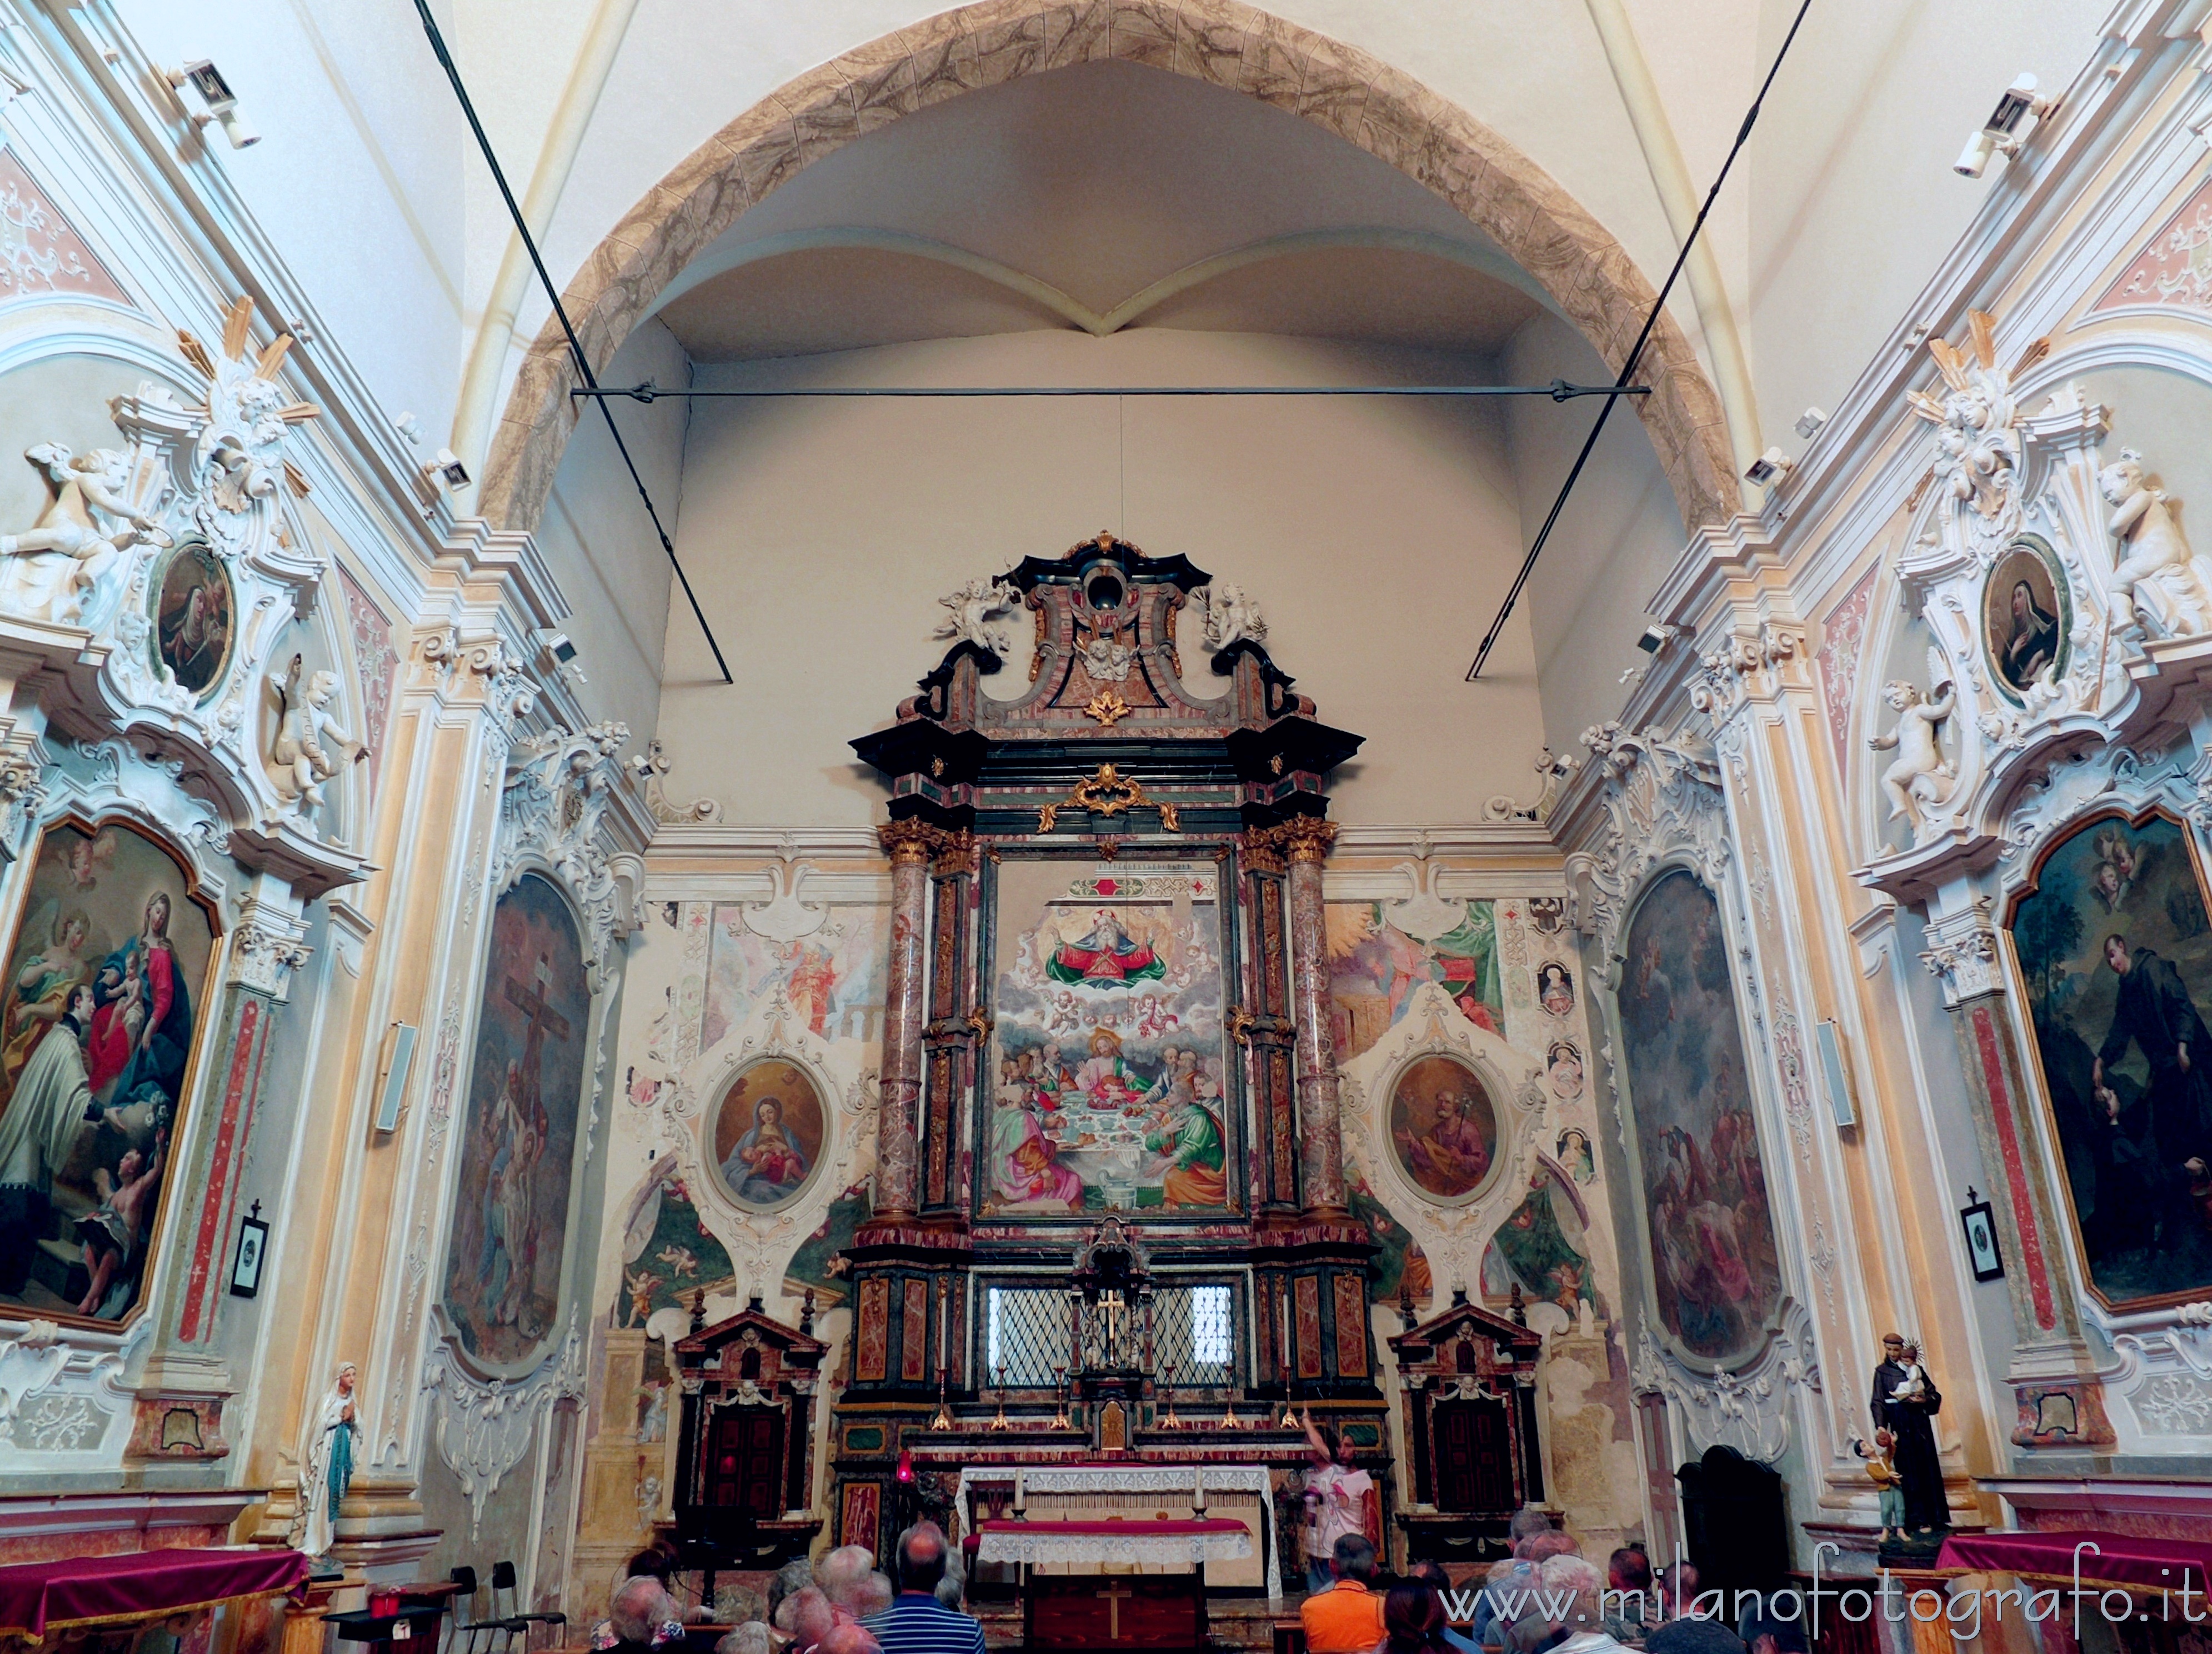 Besana in Brianza (Monza e Brianza, Italy): Interior of the public Church of Sts. Peter and Paul of the Former Benedictine Monastery of Brugora - Besana in Brianza (Monza e Brianza, Italy)